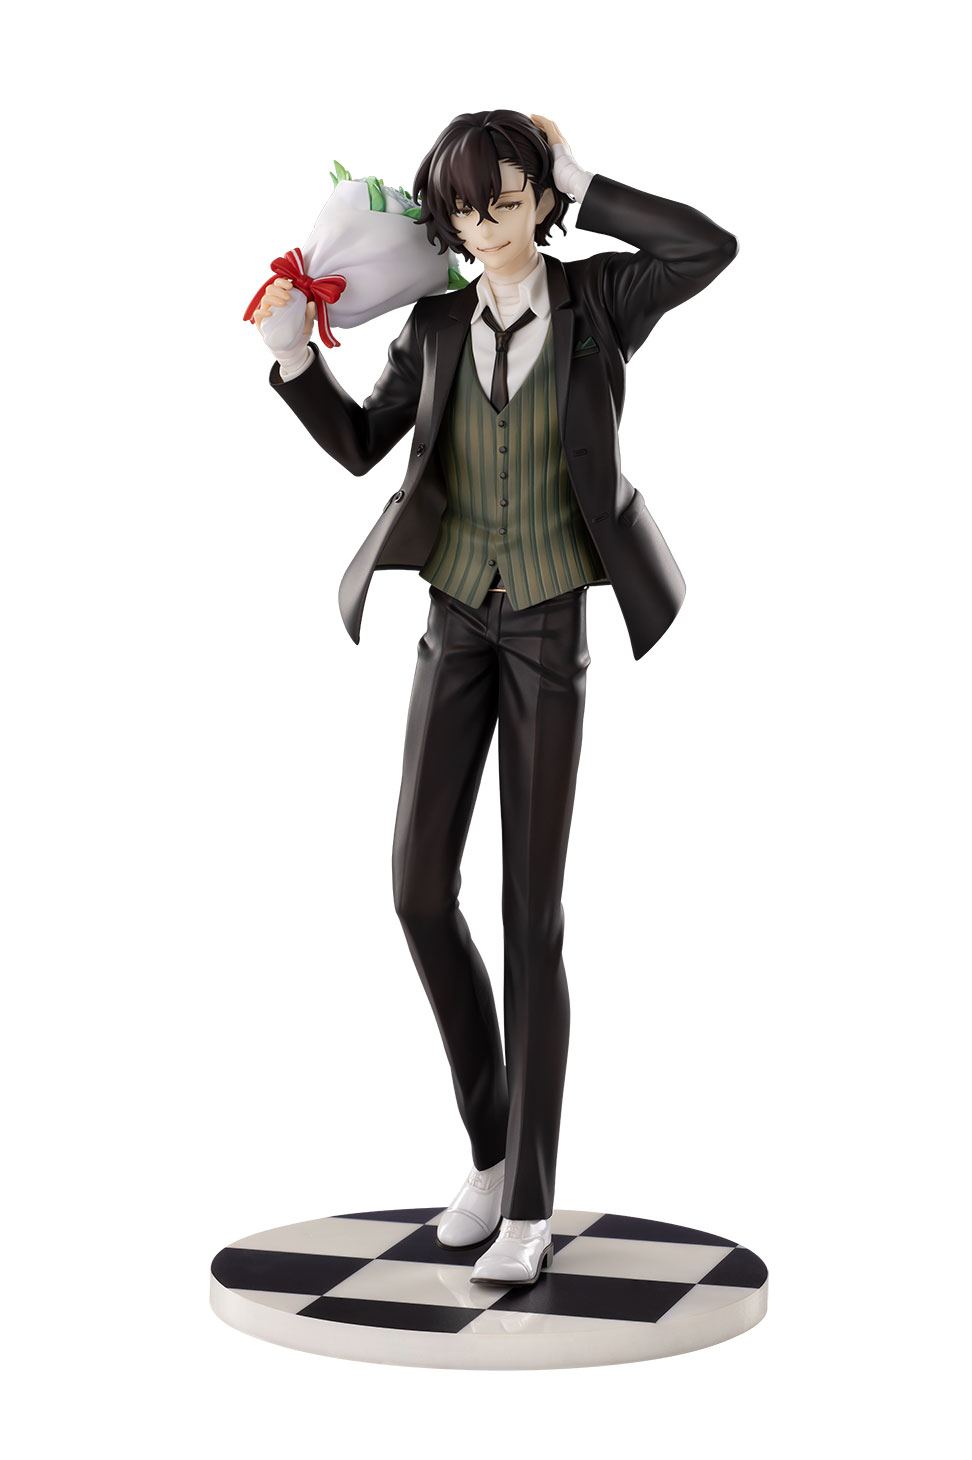 Bungo Stray Dogs Tales of the Lost 1/8 Scale Pre-Painted Figure: Dazai Osamu Dress Up Ver. Hobbymax